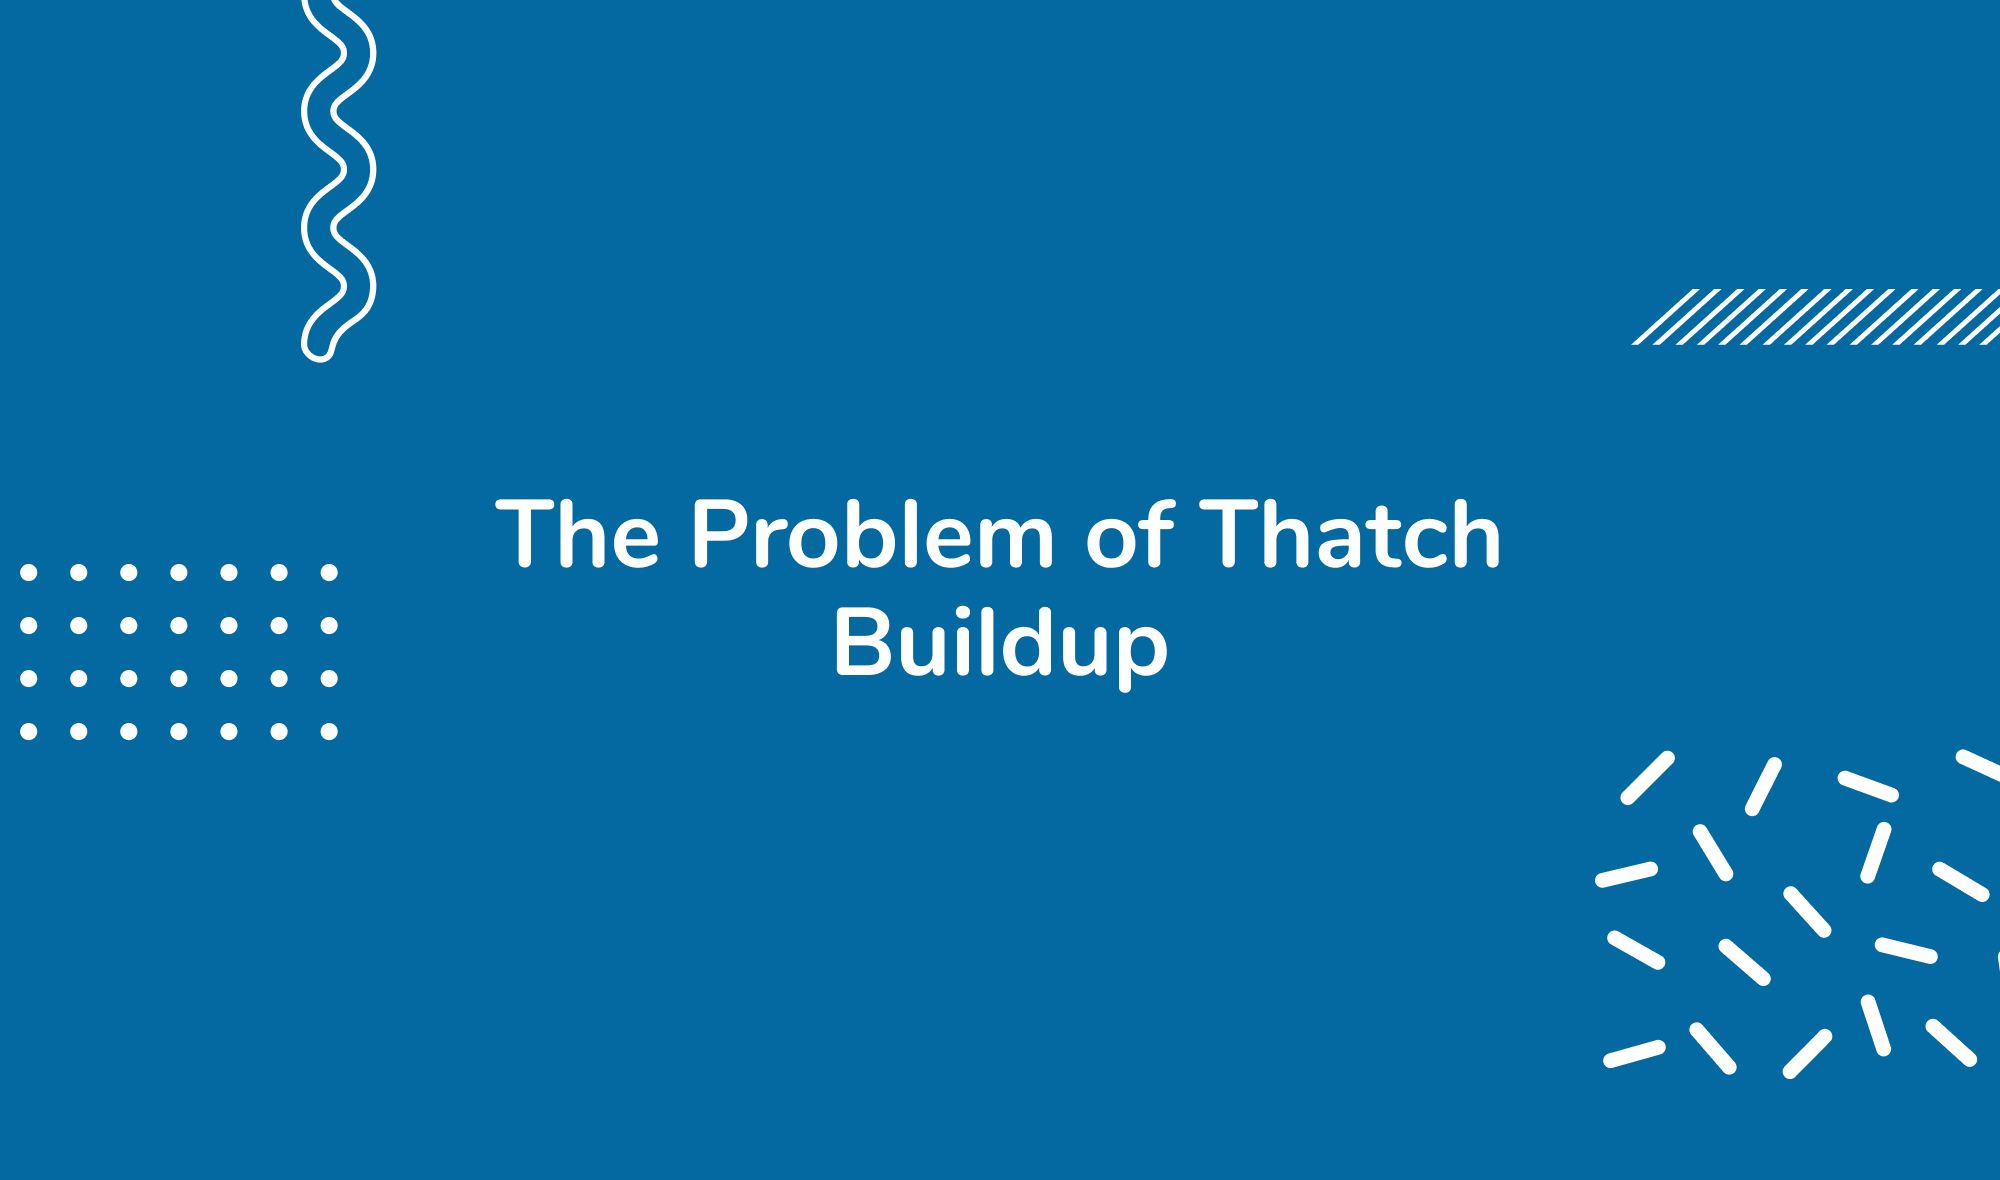 The Problem of Thatch Buildup